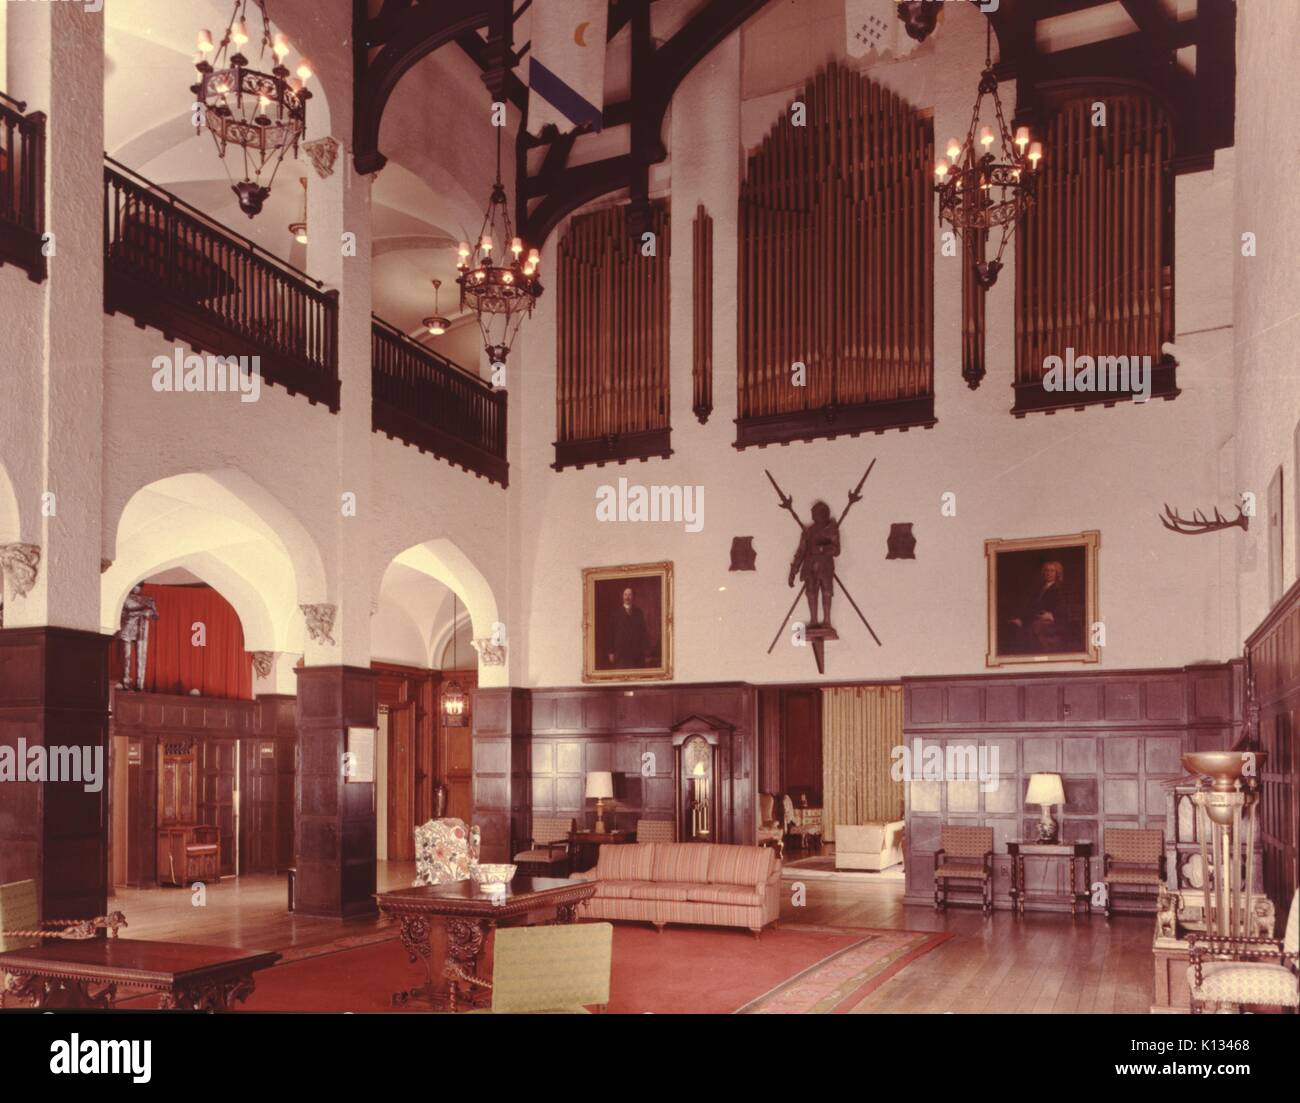 Great hall at Casa Loma, a Gothic Revival mansion patterned after a castle, Toronto, Ontario, Canada, 1967. Stock Photo